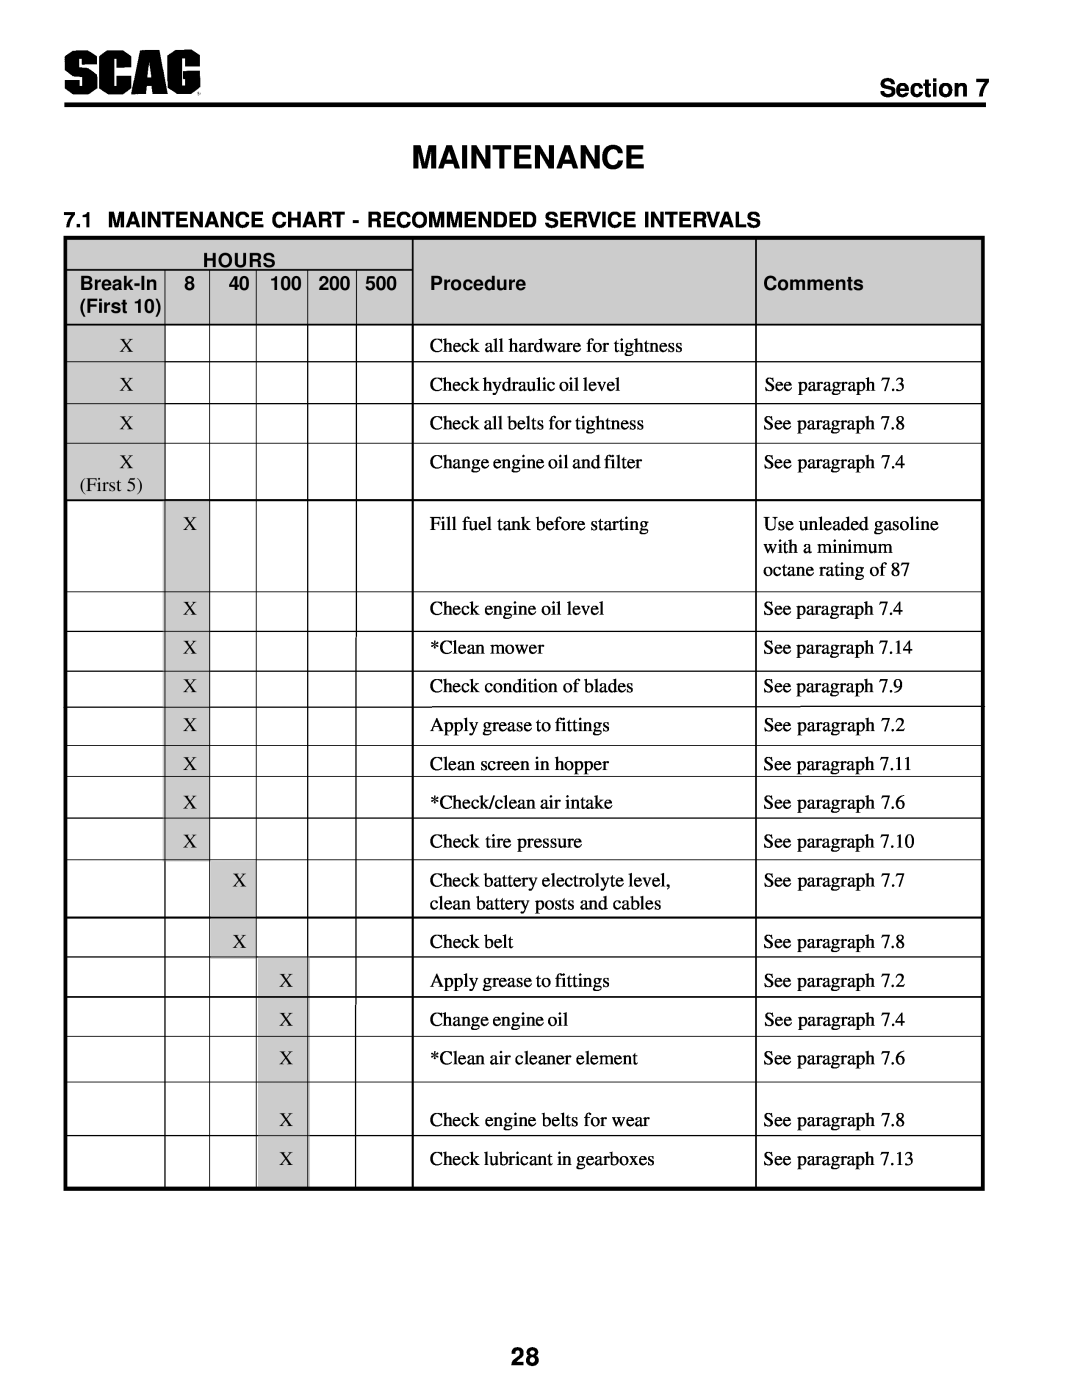 MB QUART SCR Maintenance Chart - Recommended Service Intervals, Section, Hours, Break-In, 40 100 200, Procedure, First 